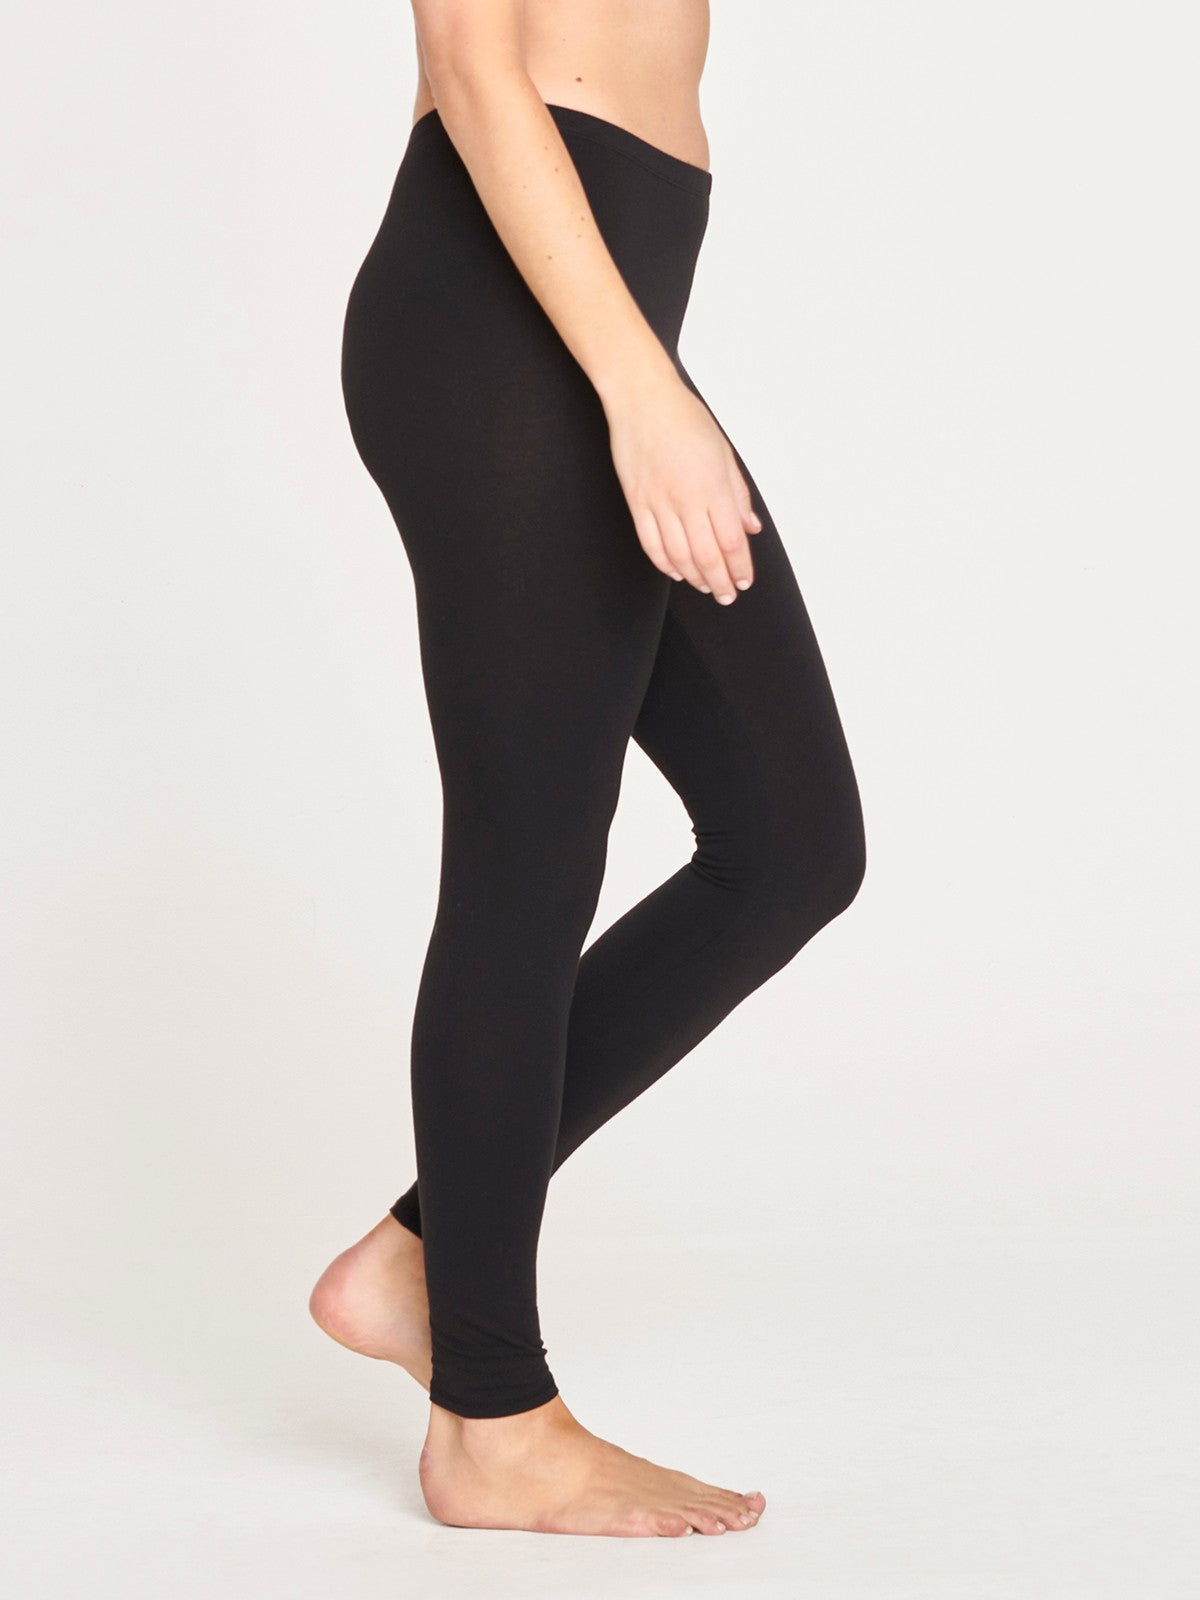 Boody Women's Full Length Leggings Size M - Organic Bamboo - Comfortable &  Breathable EcoWear,Black : Buy Online at Best Price in KSA - Souq is now  : Fashion